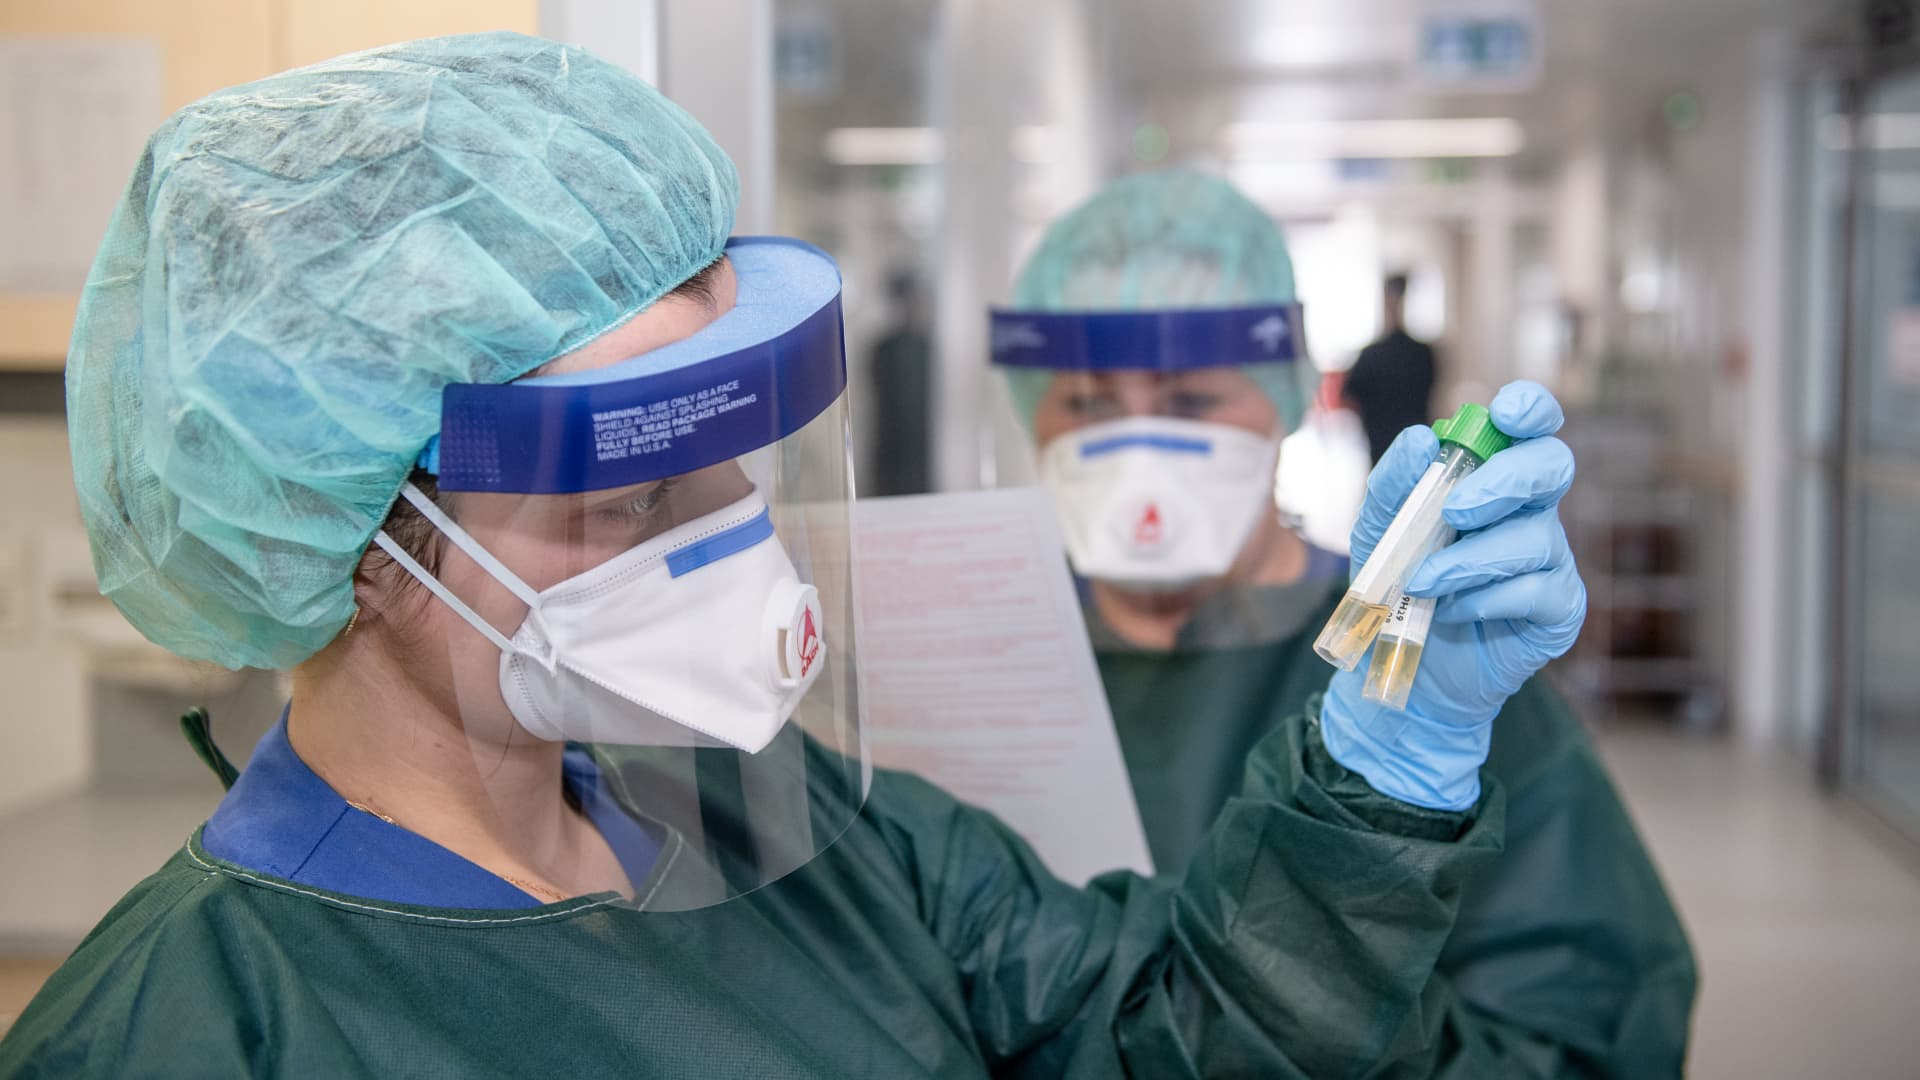 Kübra Yilmaz and Canan Emcan, nurses of the infection ward of the university hospital, in protective clothing and behind a breathing mask, look at two smear tubes and the corresponding virology certificate. In Essen, the city and university hospital feel well prepared for patients infected with the novel coronavirus.